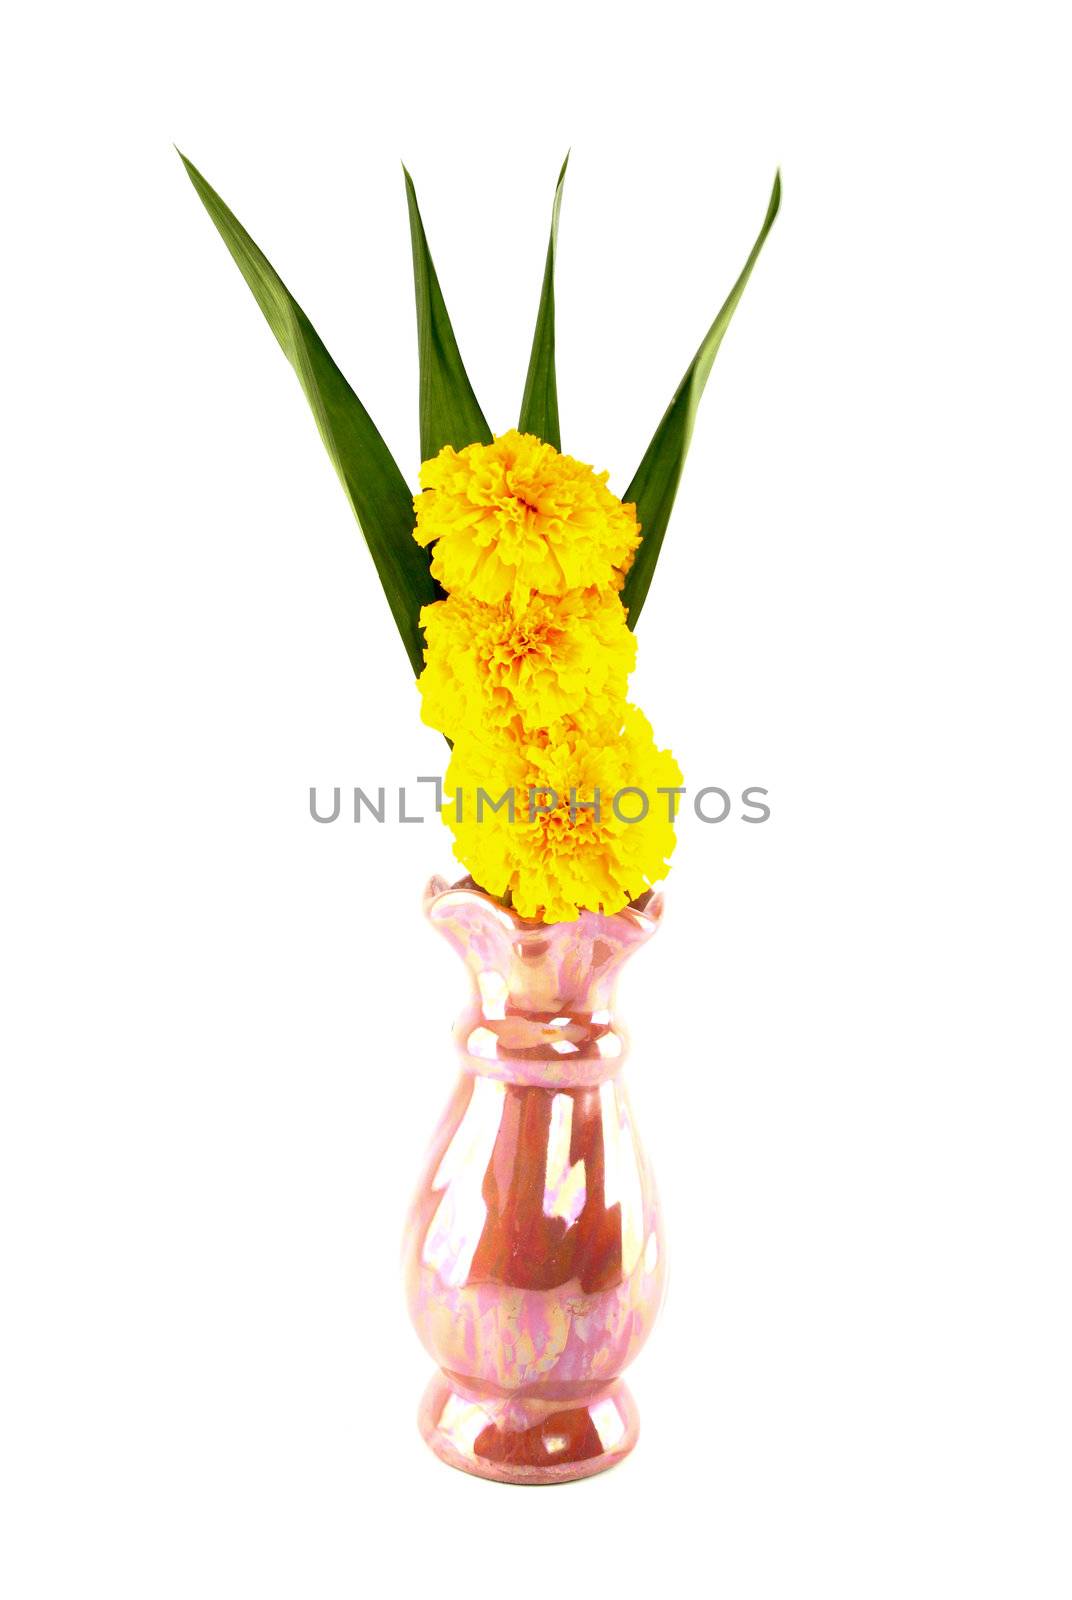 Marigold and pandan in vase for worship on white background by geargodz